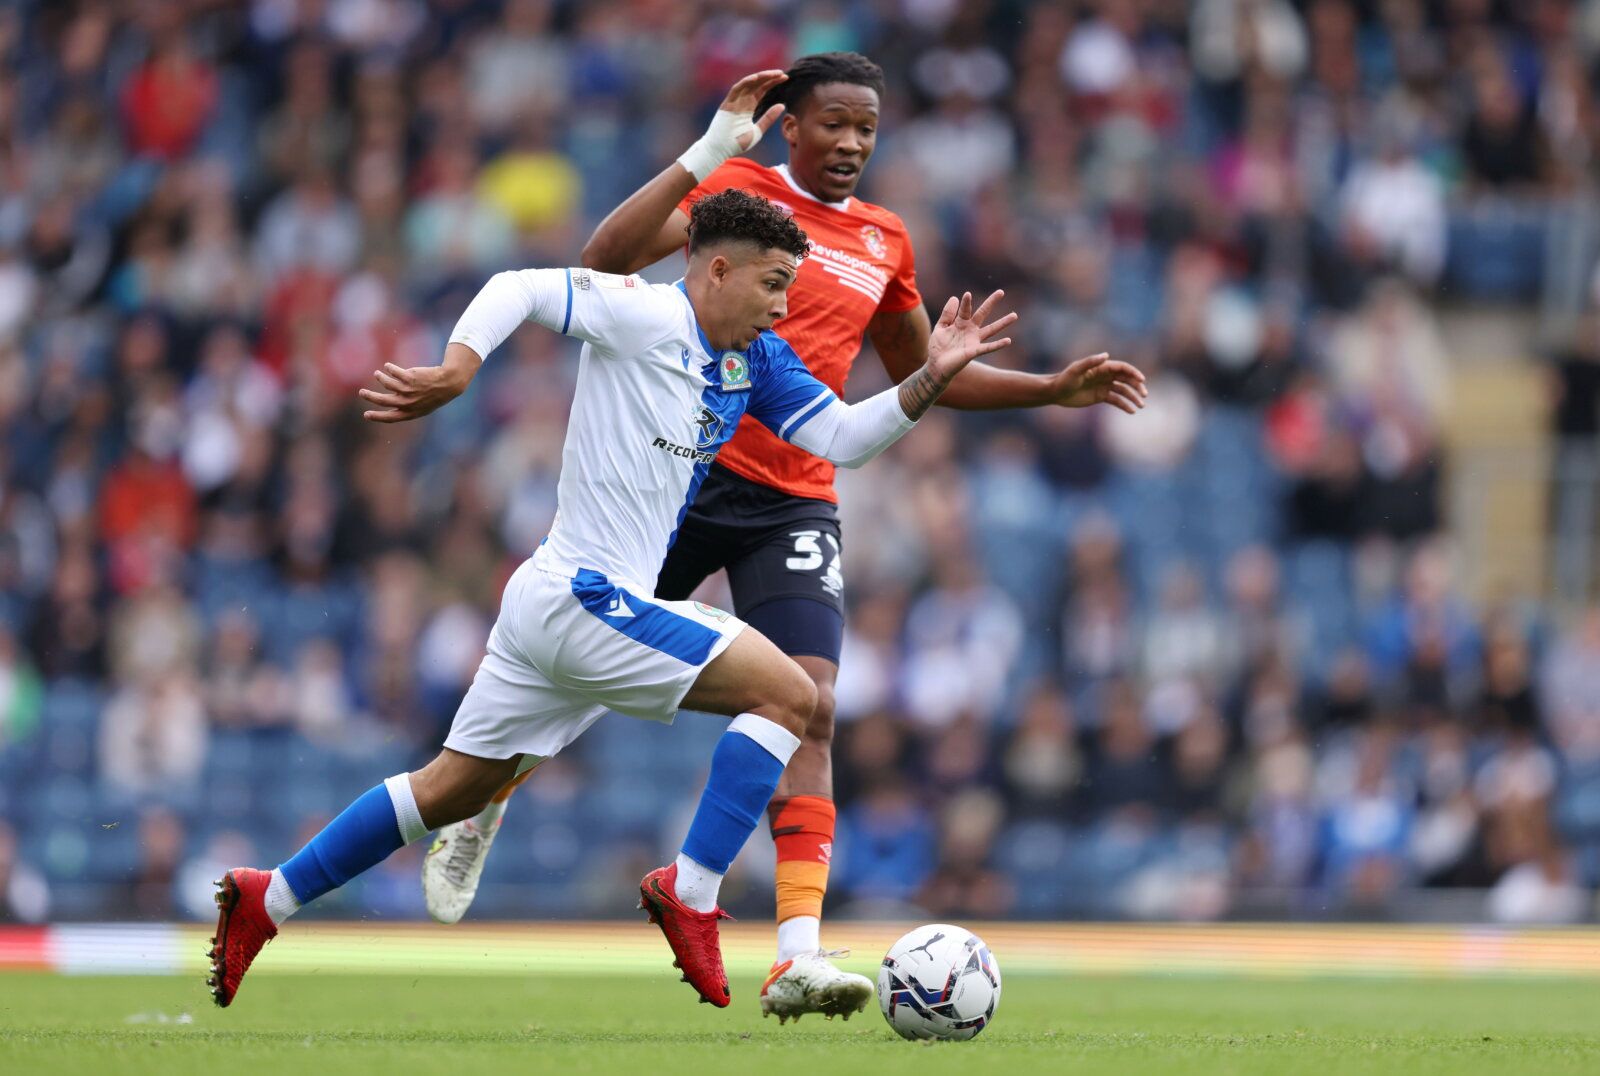 Soccer Football - Championship - Blackburn Rovers v Luton Town - Ewood Park, Blackburn, Britain - September 11, 2021  Blackburn Rovers' Tyrhys Dolan in action with Luton Town's Gabriel Osho  Action Images/John Clifton  EDITORIAL USE ONLY. No use with unauthorized audio, video, data, fixture lists, club/league logos or "live" services. Online in-match use limited to 75 images, no video emulation. No use in betting, games or single club/league/player publications.  Please contact your account repr